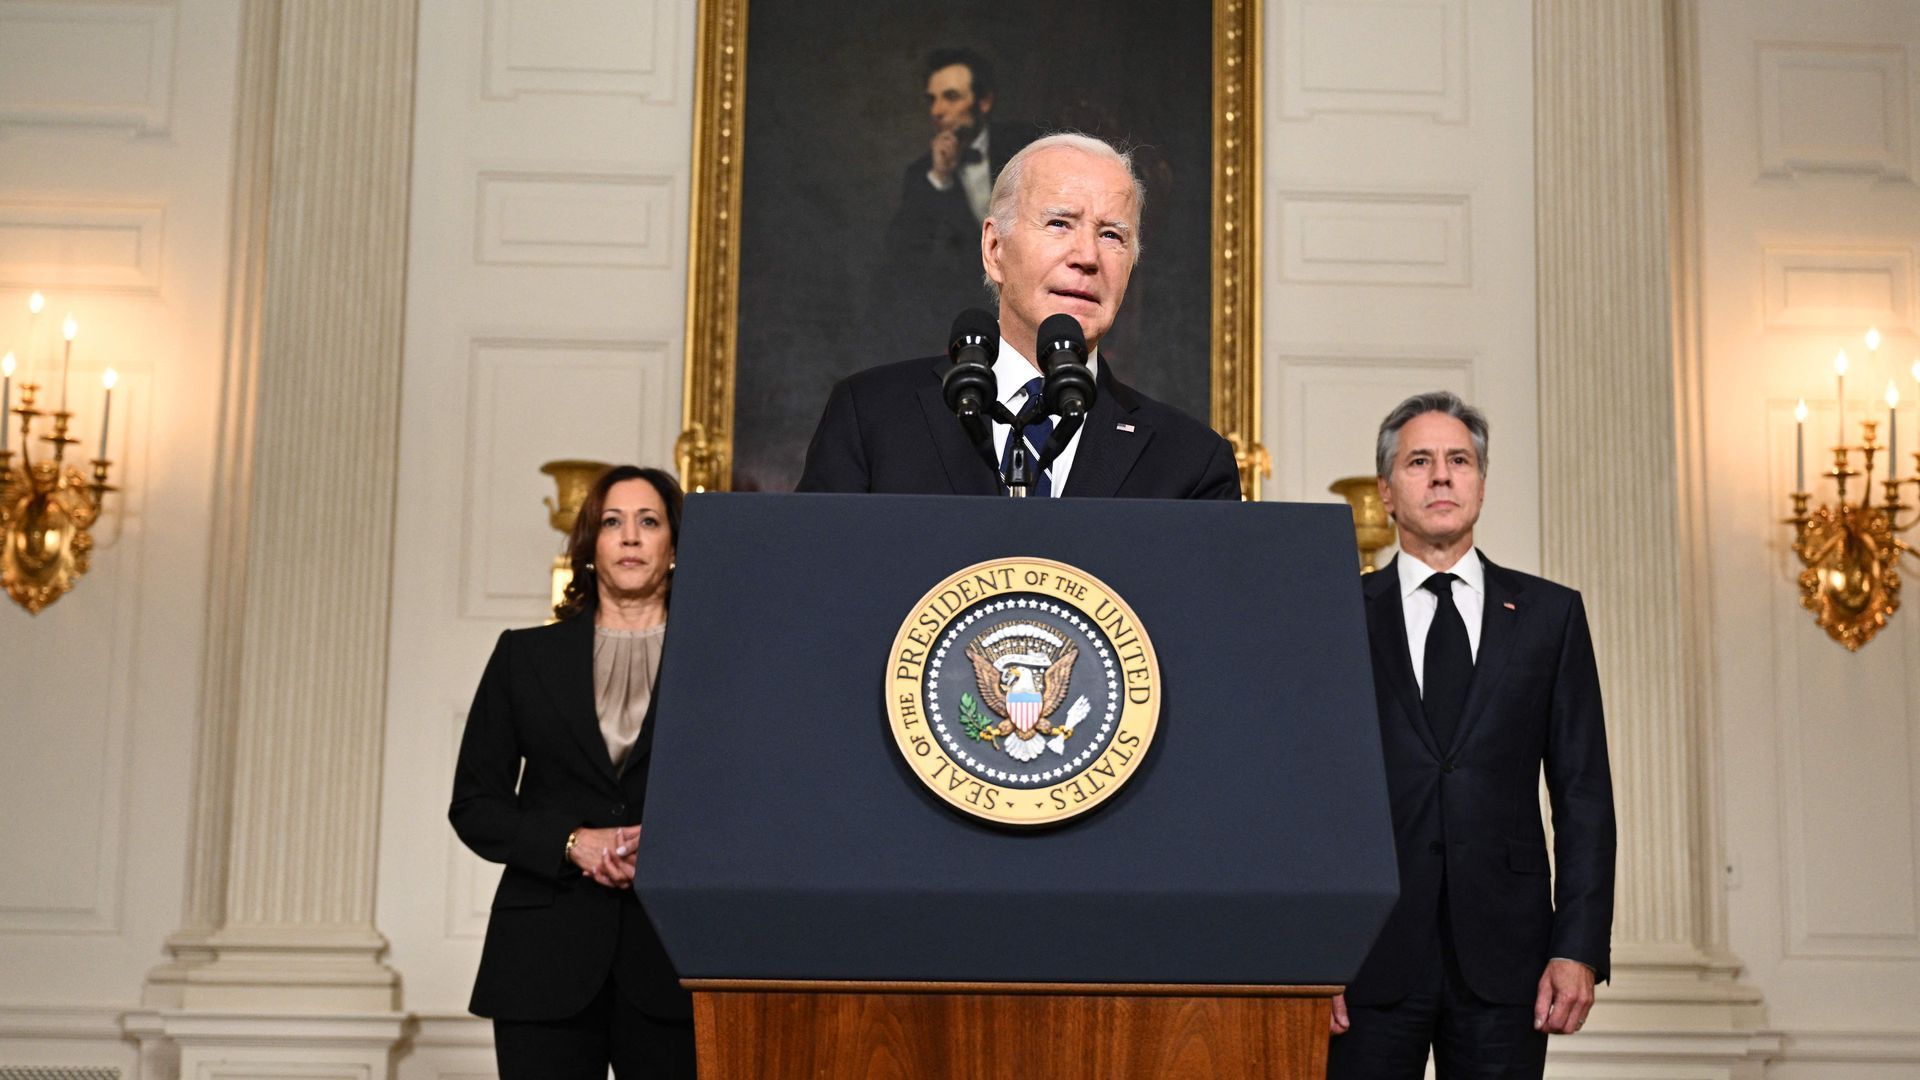 President Biden, with Vice President Kamala Harris and Secretary of State Antony Blinken, speaks about the attacks on Israel, in the the White House in Washington, D.C., on Oct. 10. Photo: Brendan Smialowski/AFP via Getty Images